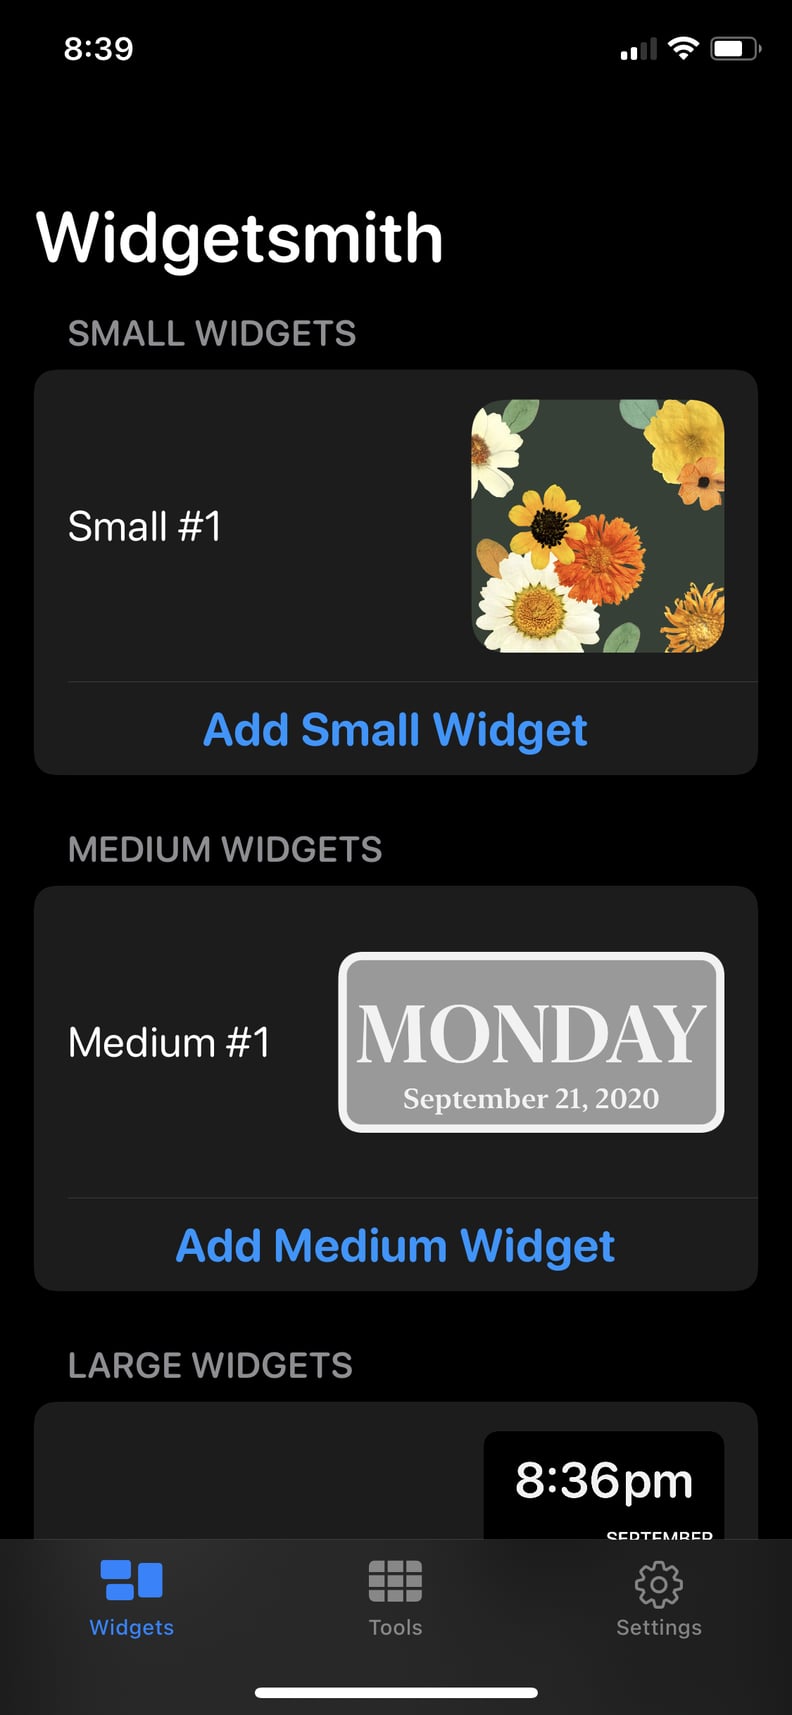 How to Create Your Own Widgets With the Widgetsmith App